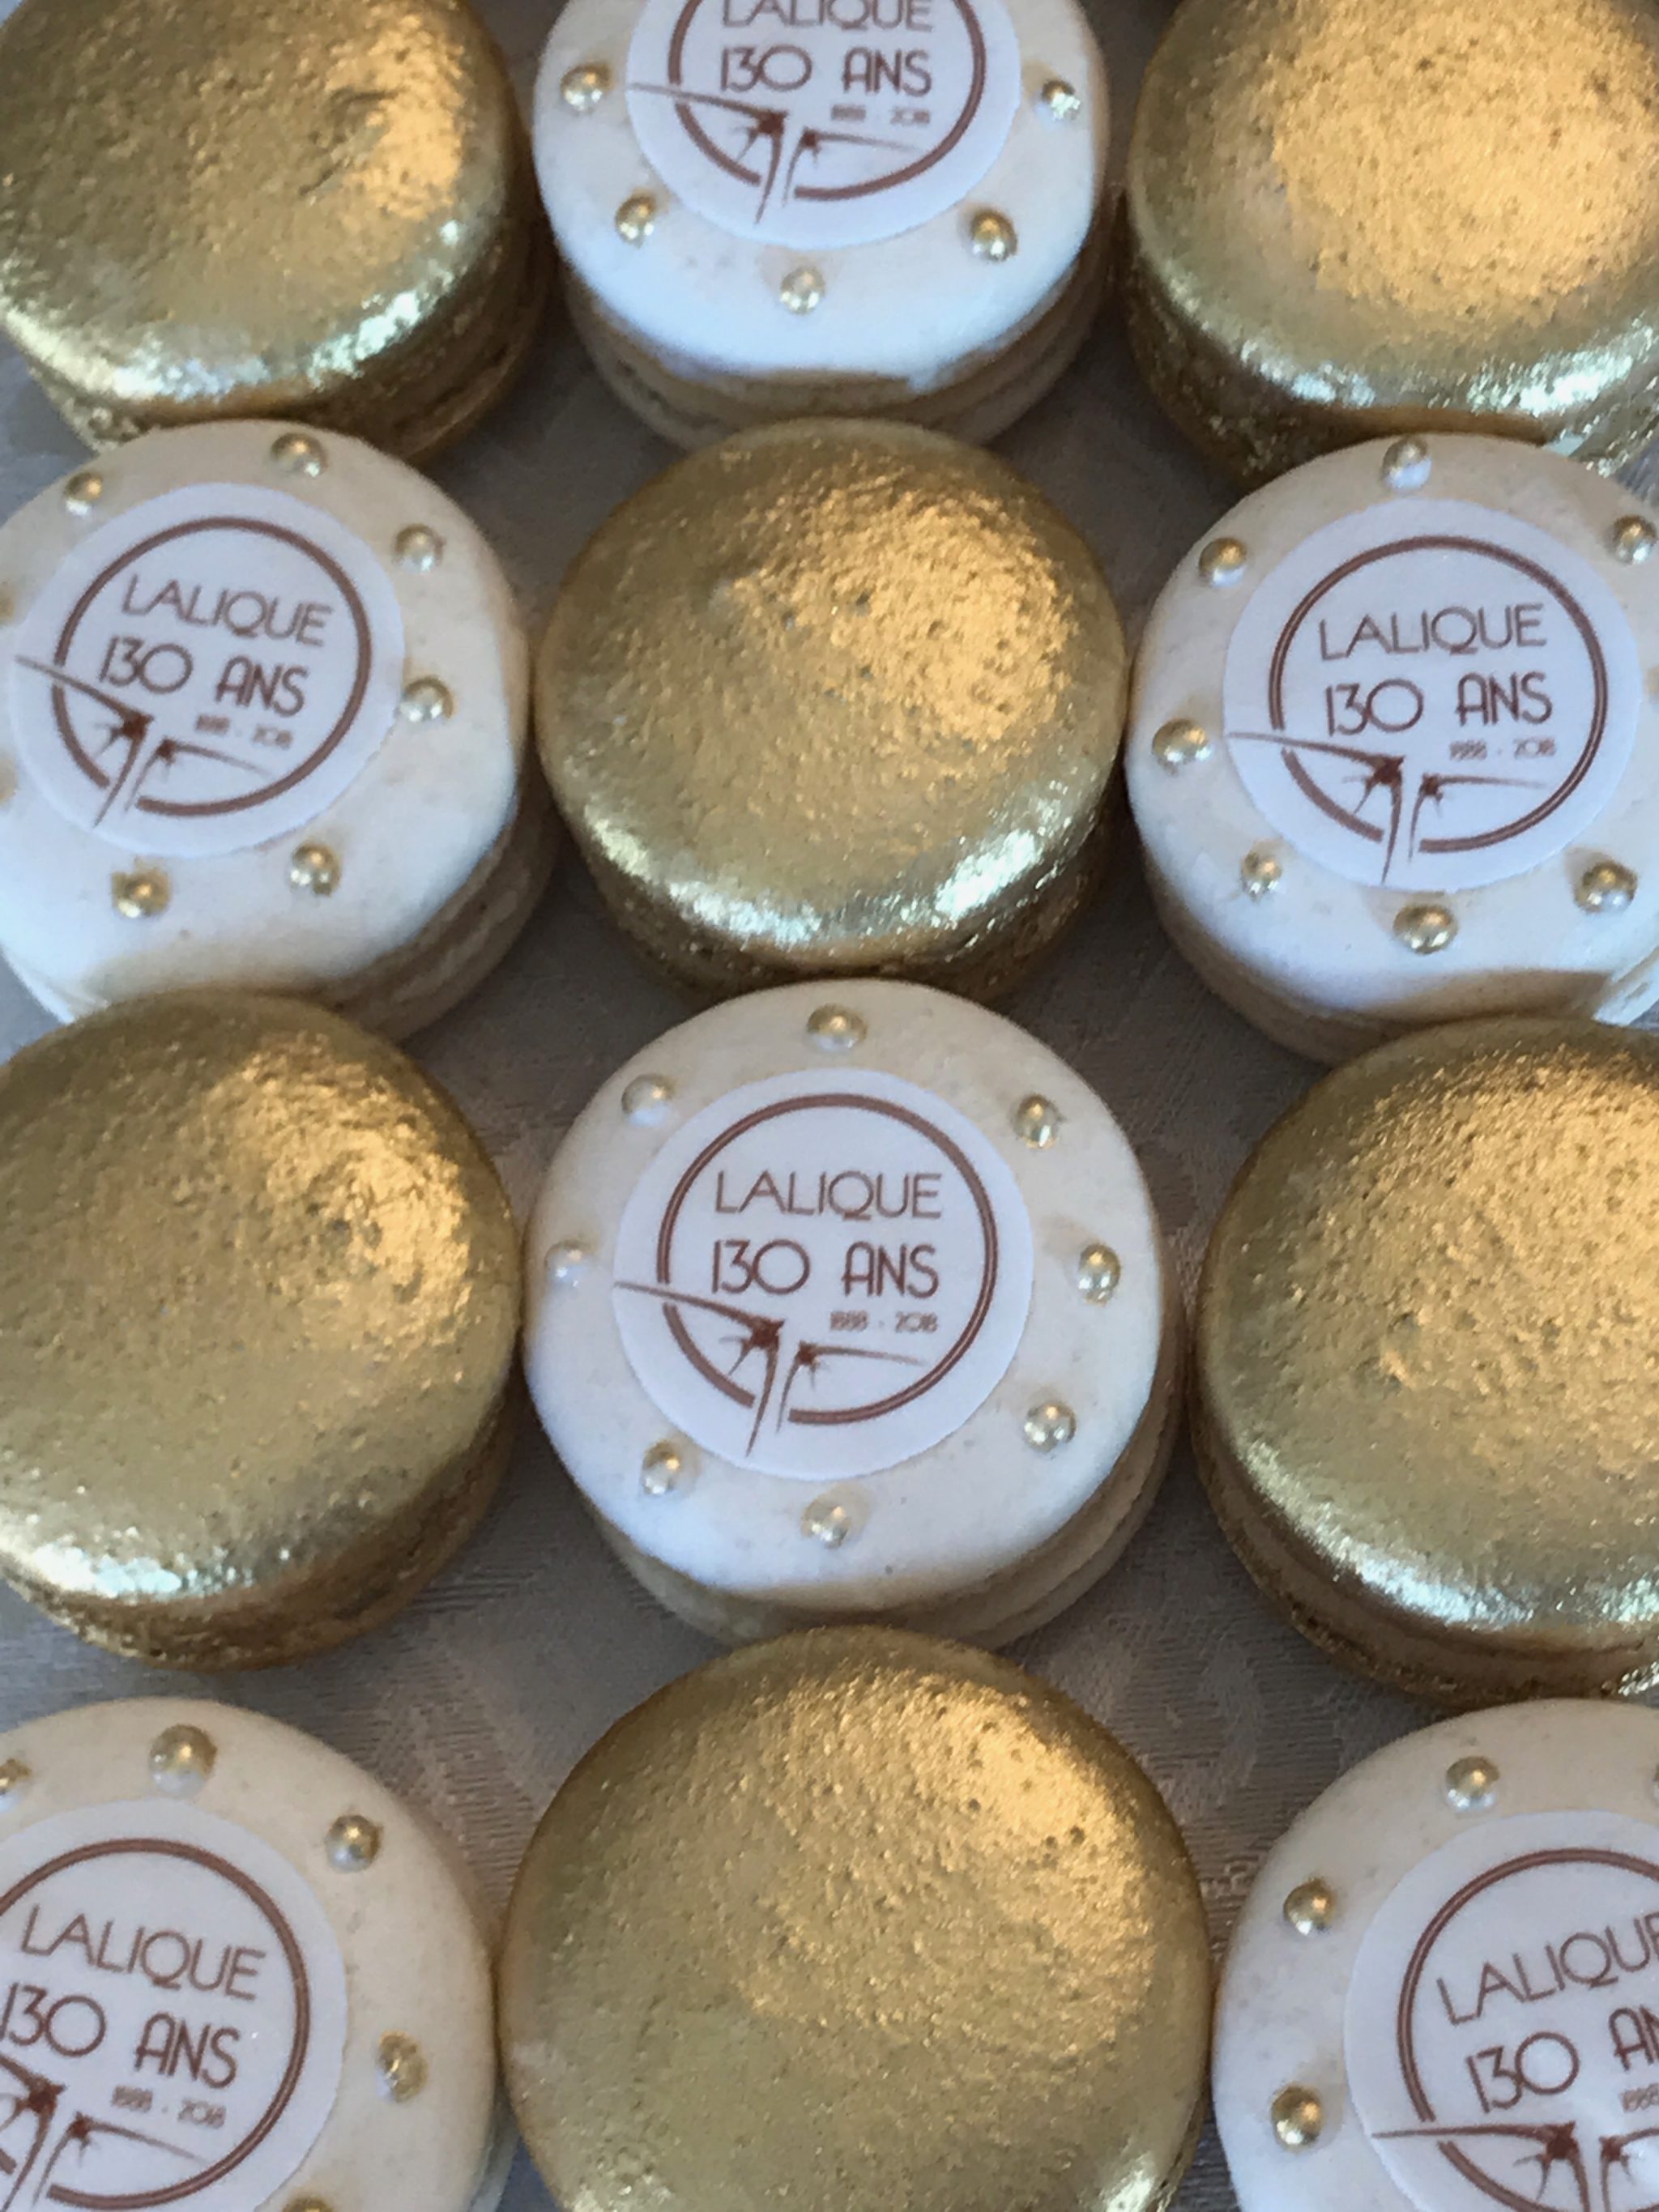 Corporate Branded Macarons